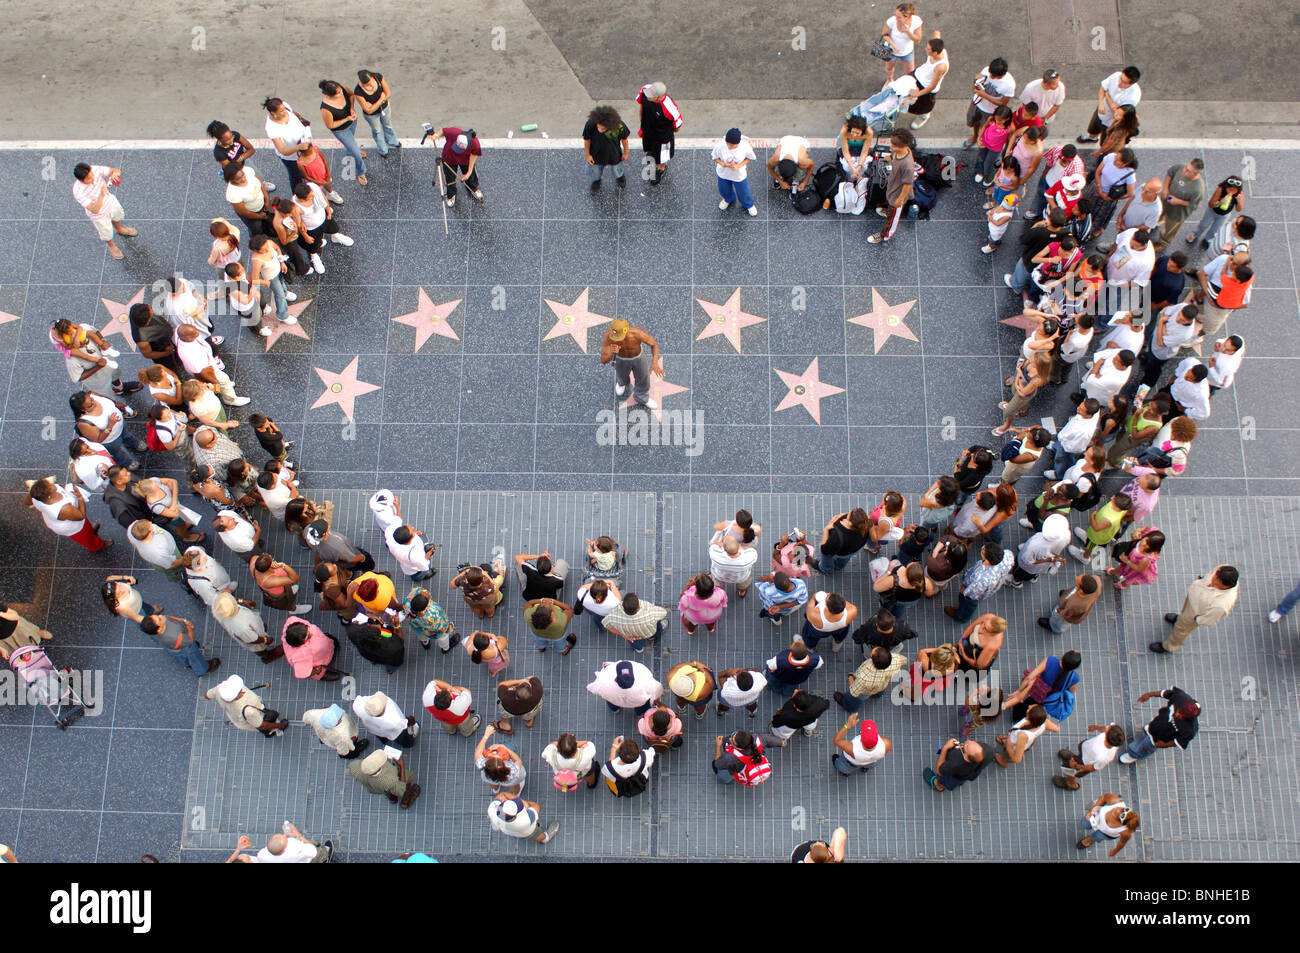 Usa Los Angeles California Street Performer Walk Of Fame Hollywood Boulevard Hollywood Stars Music Culture Scene United States Stock Photo